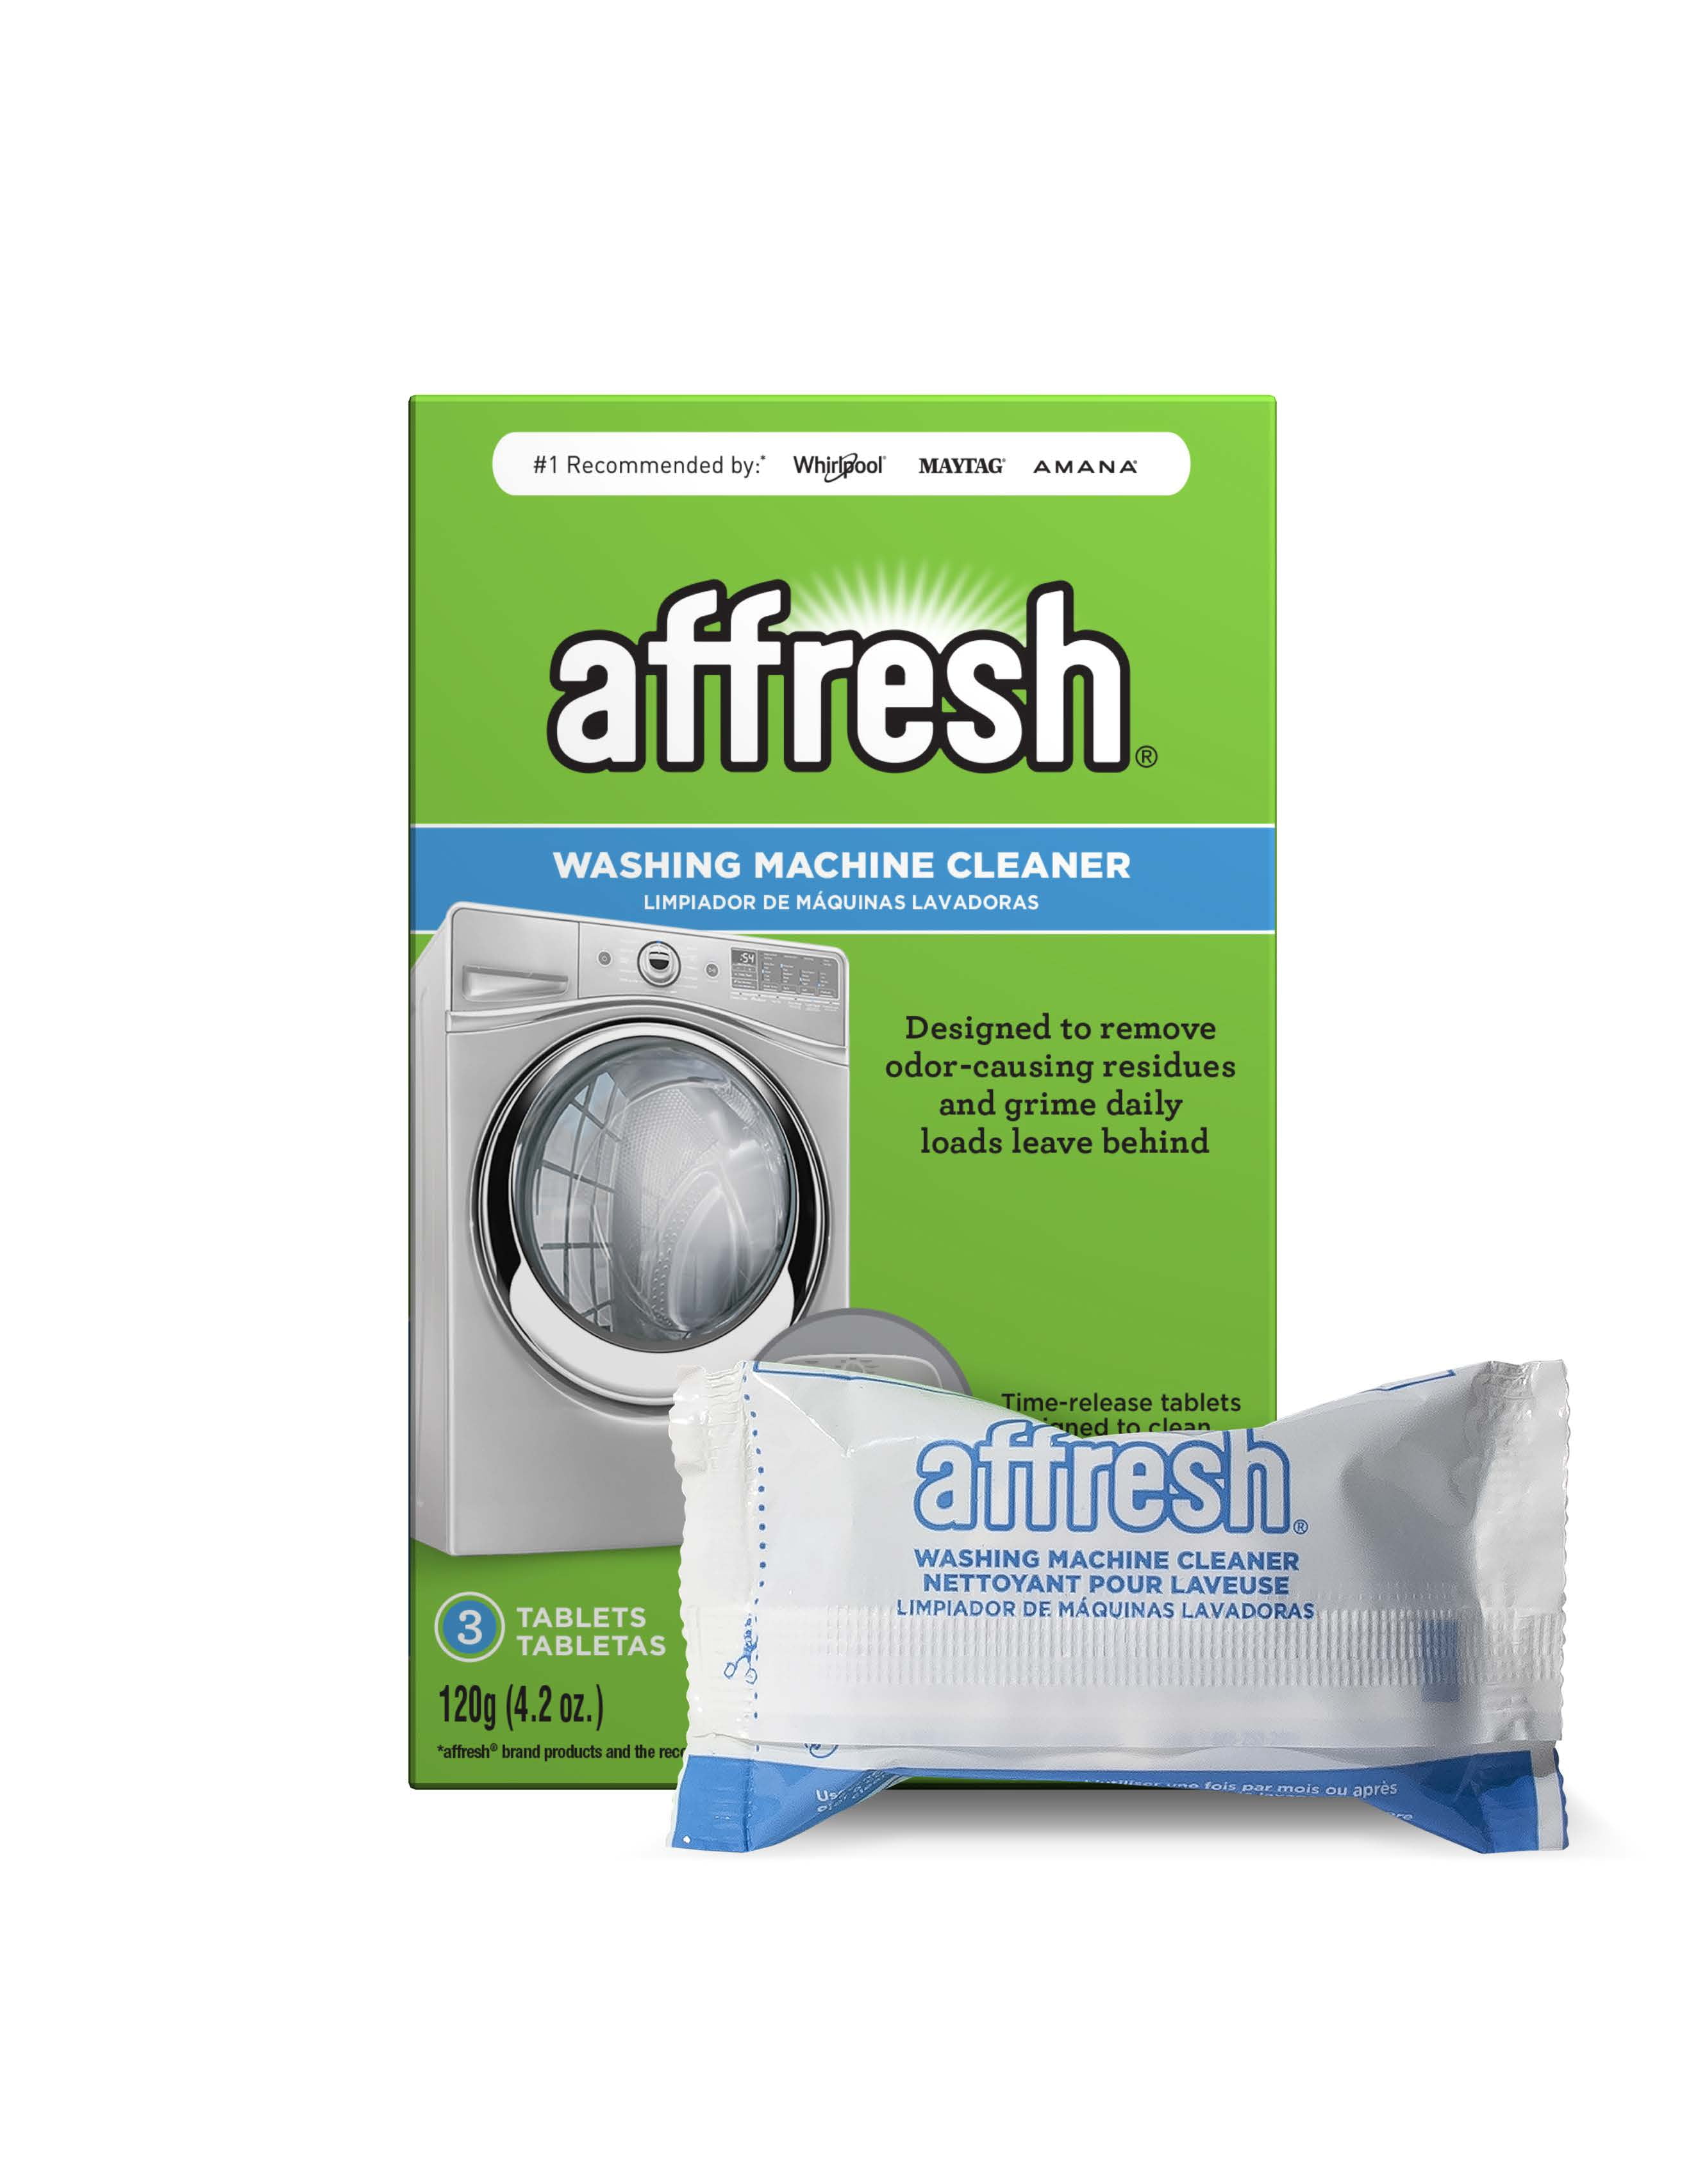 Affresh Washing Machine Cleaner Review - Do the Tablets Really